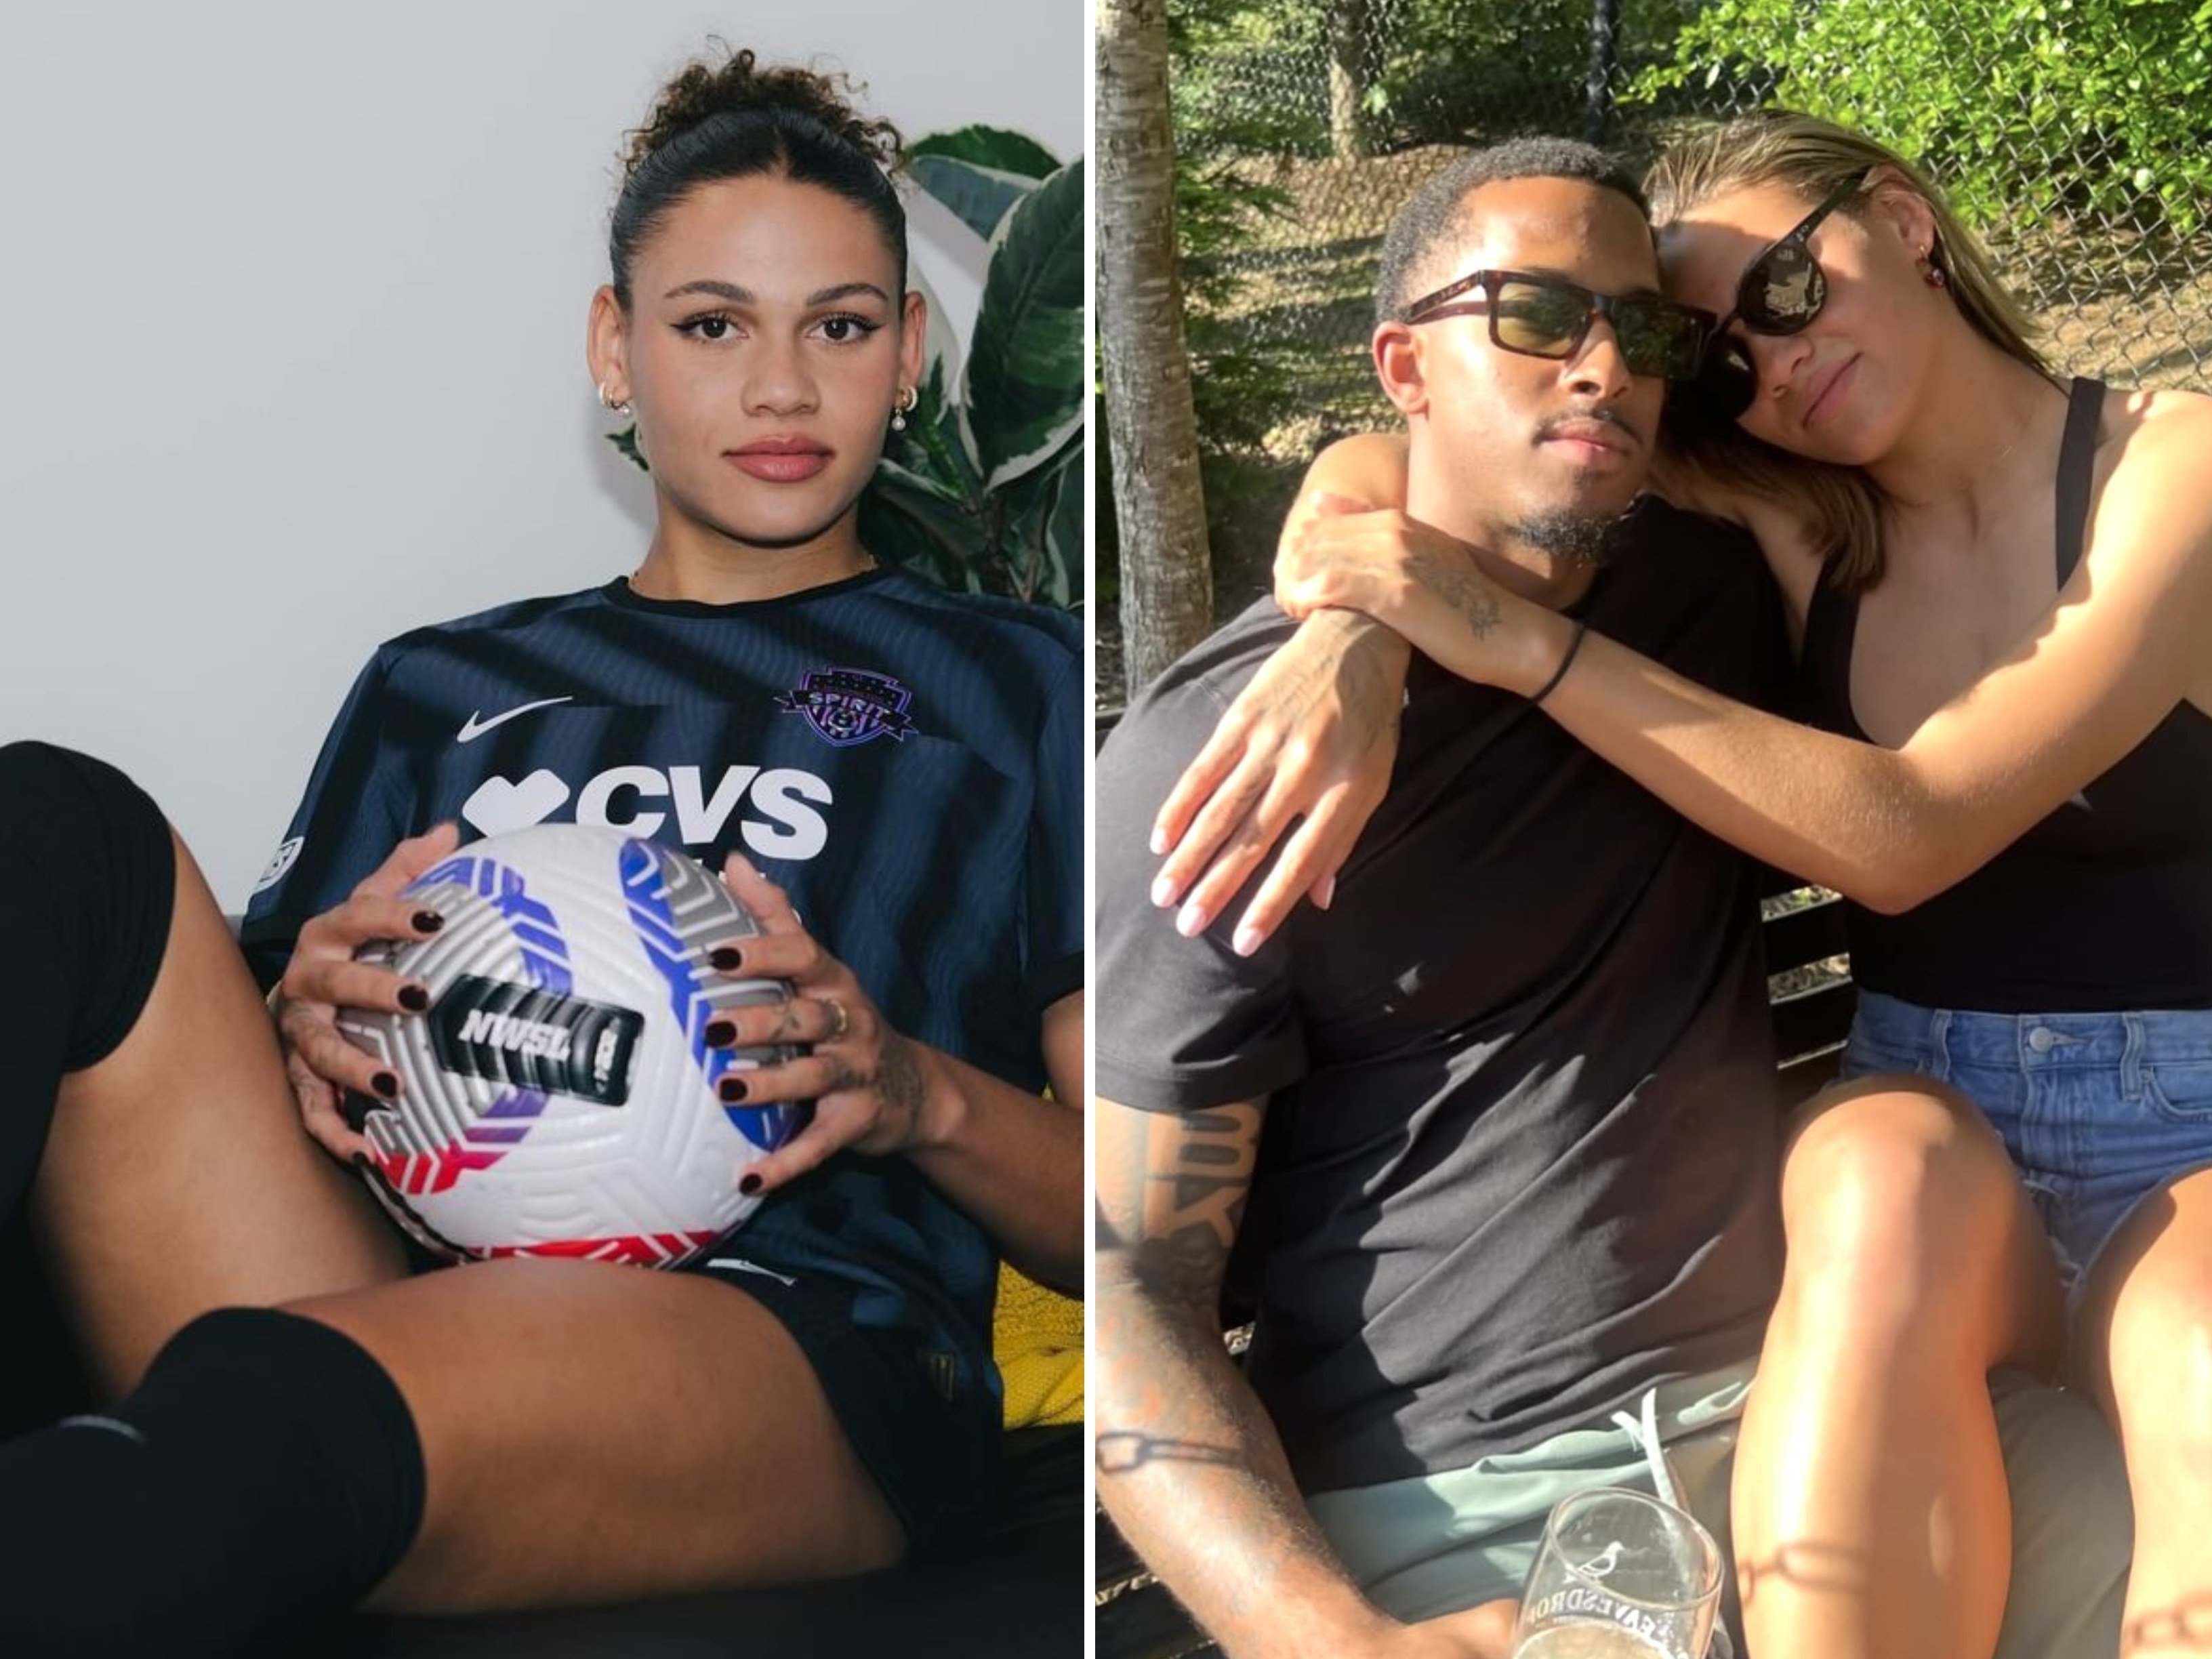 US football star Trinity Rodman, the daughter of Dennis Rodman, has “hard launched” her relationship with NFL wide receiver Trinity Benson on Instagram. Photos: @trinity_rodman/Instagram